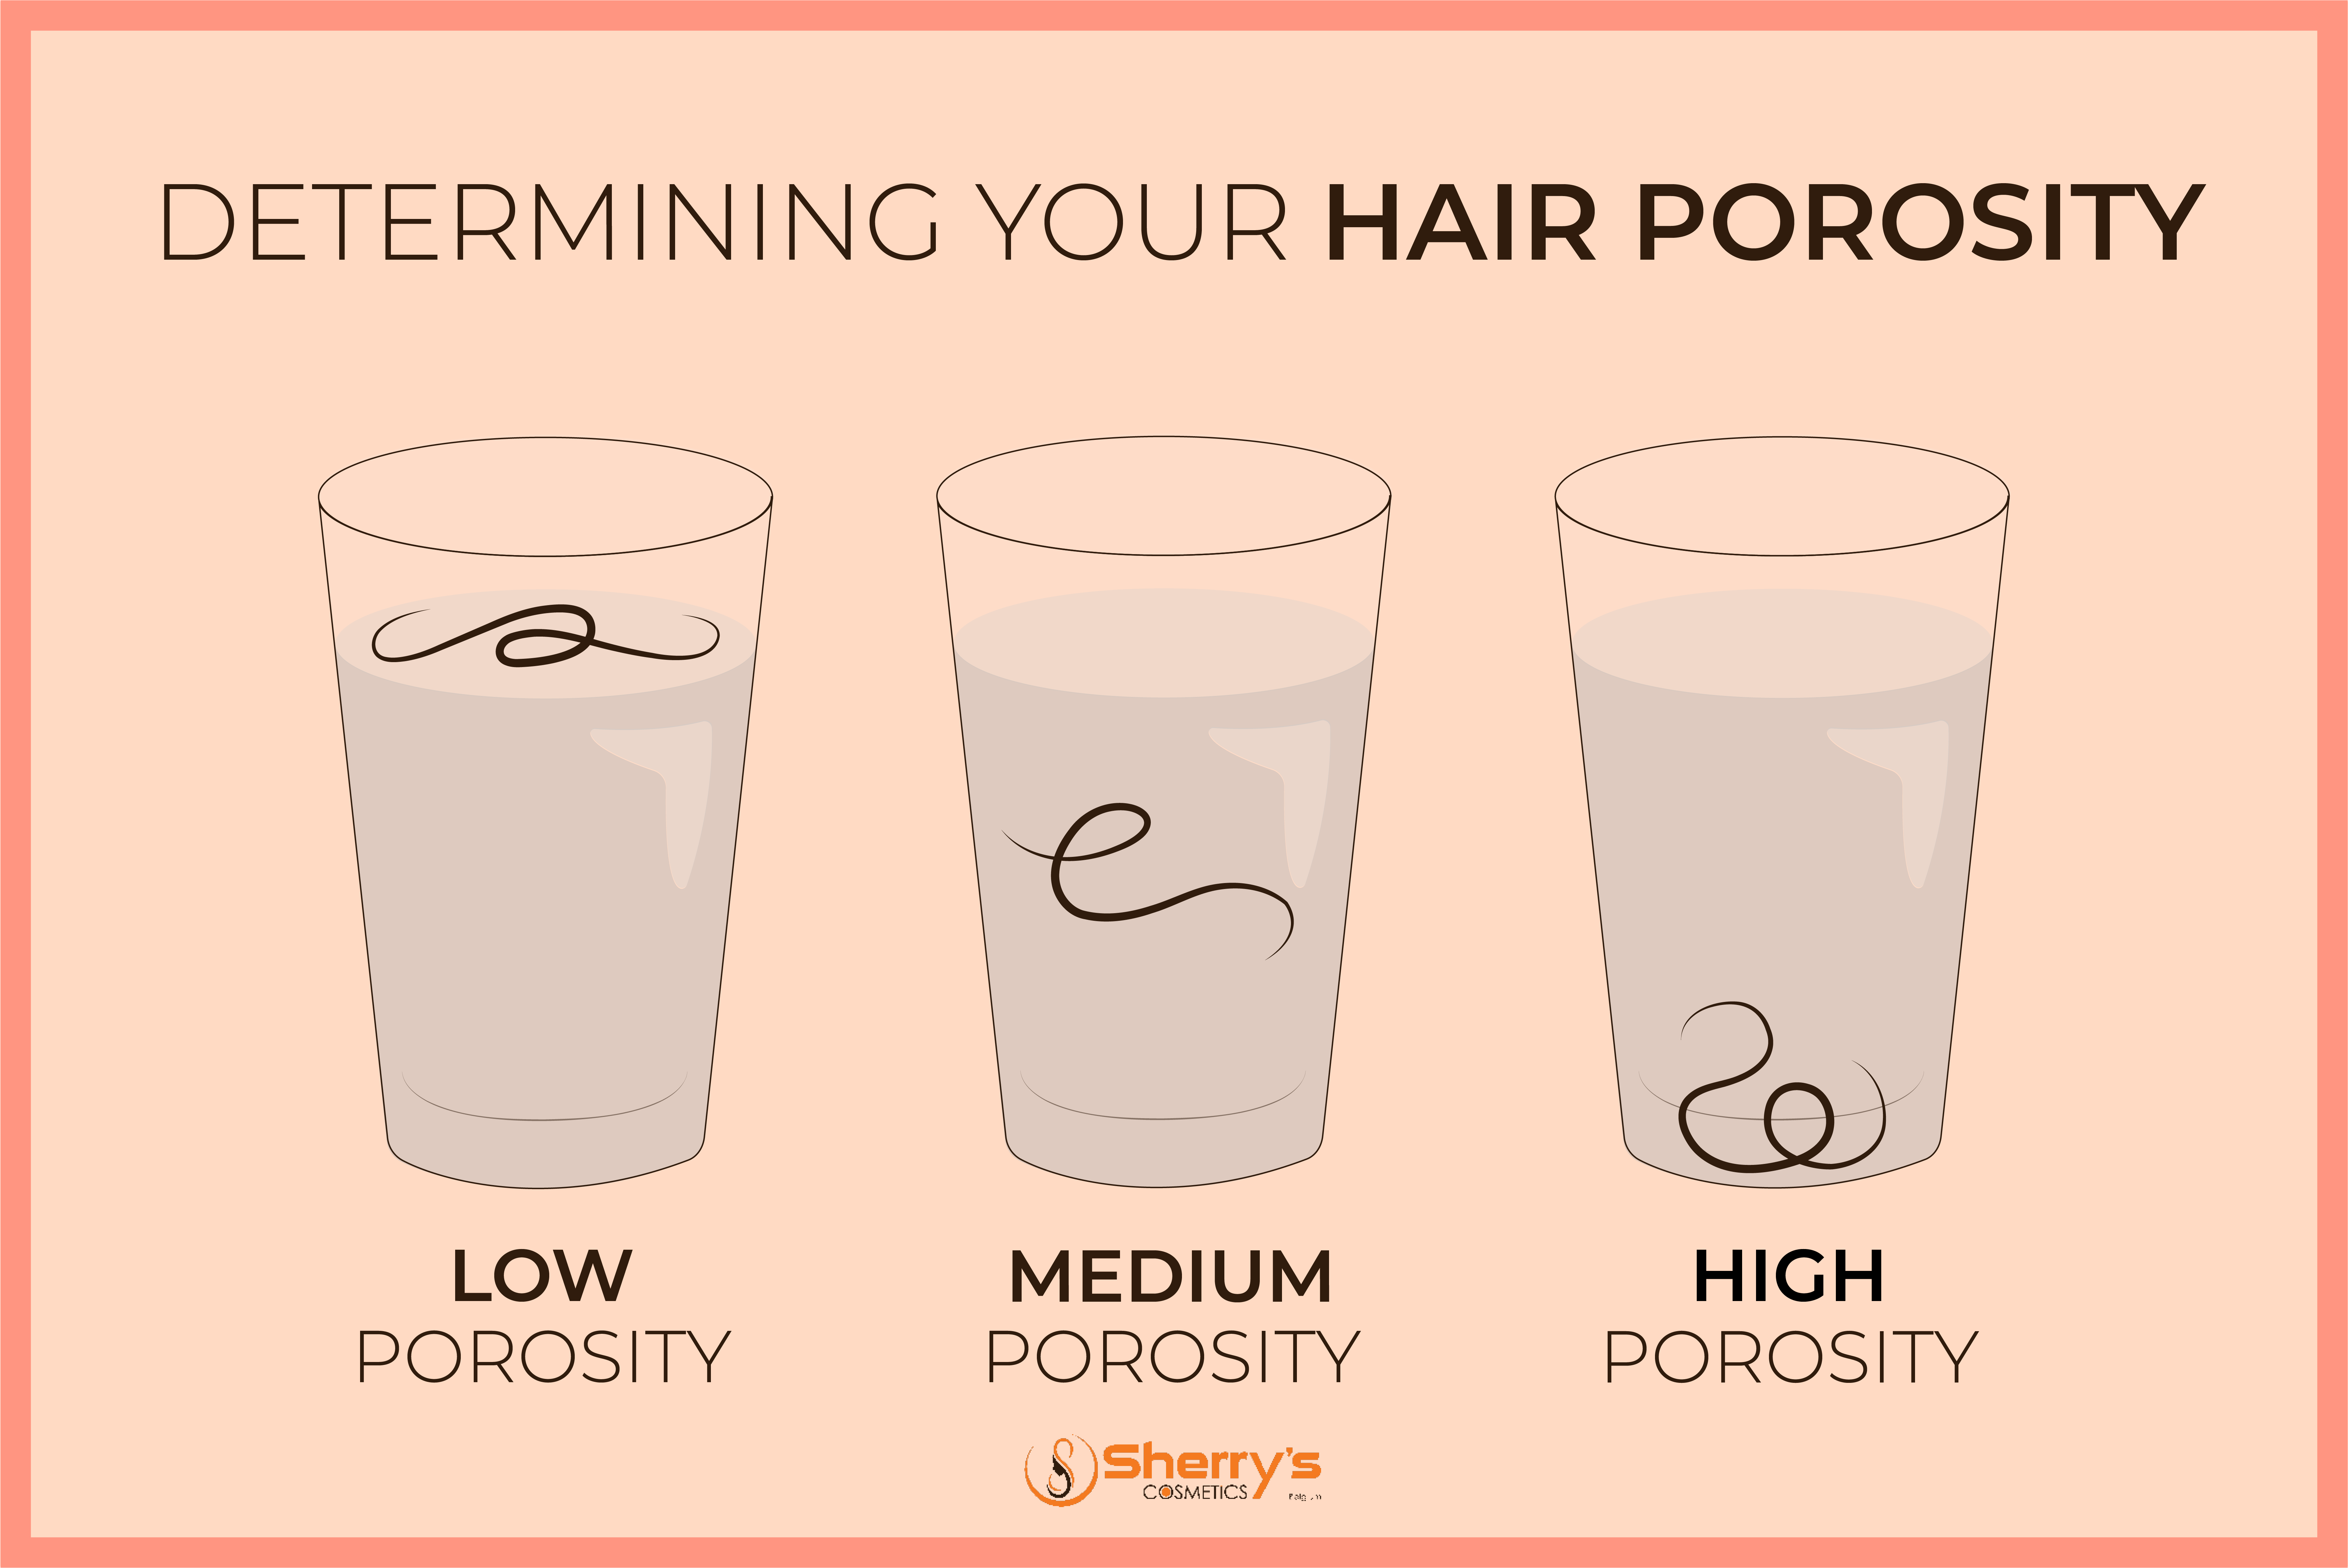 Sherry's Cosmetics illustration on how to test hair porosity. A hairstrand that floats in a glas of water means you have low porosity. A strand that immidiatly sinks means you have high porosity. A strand that sinks slowly means you have medium porosity.